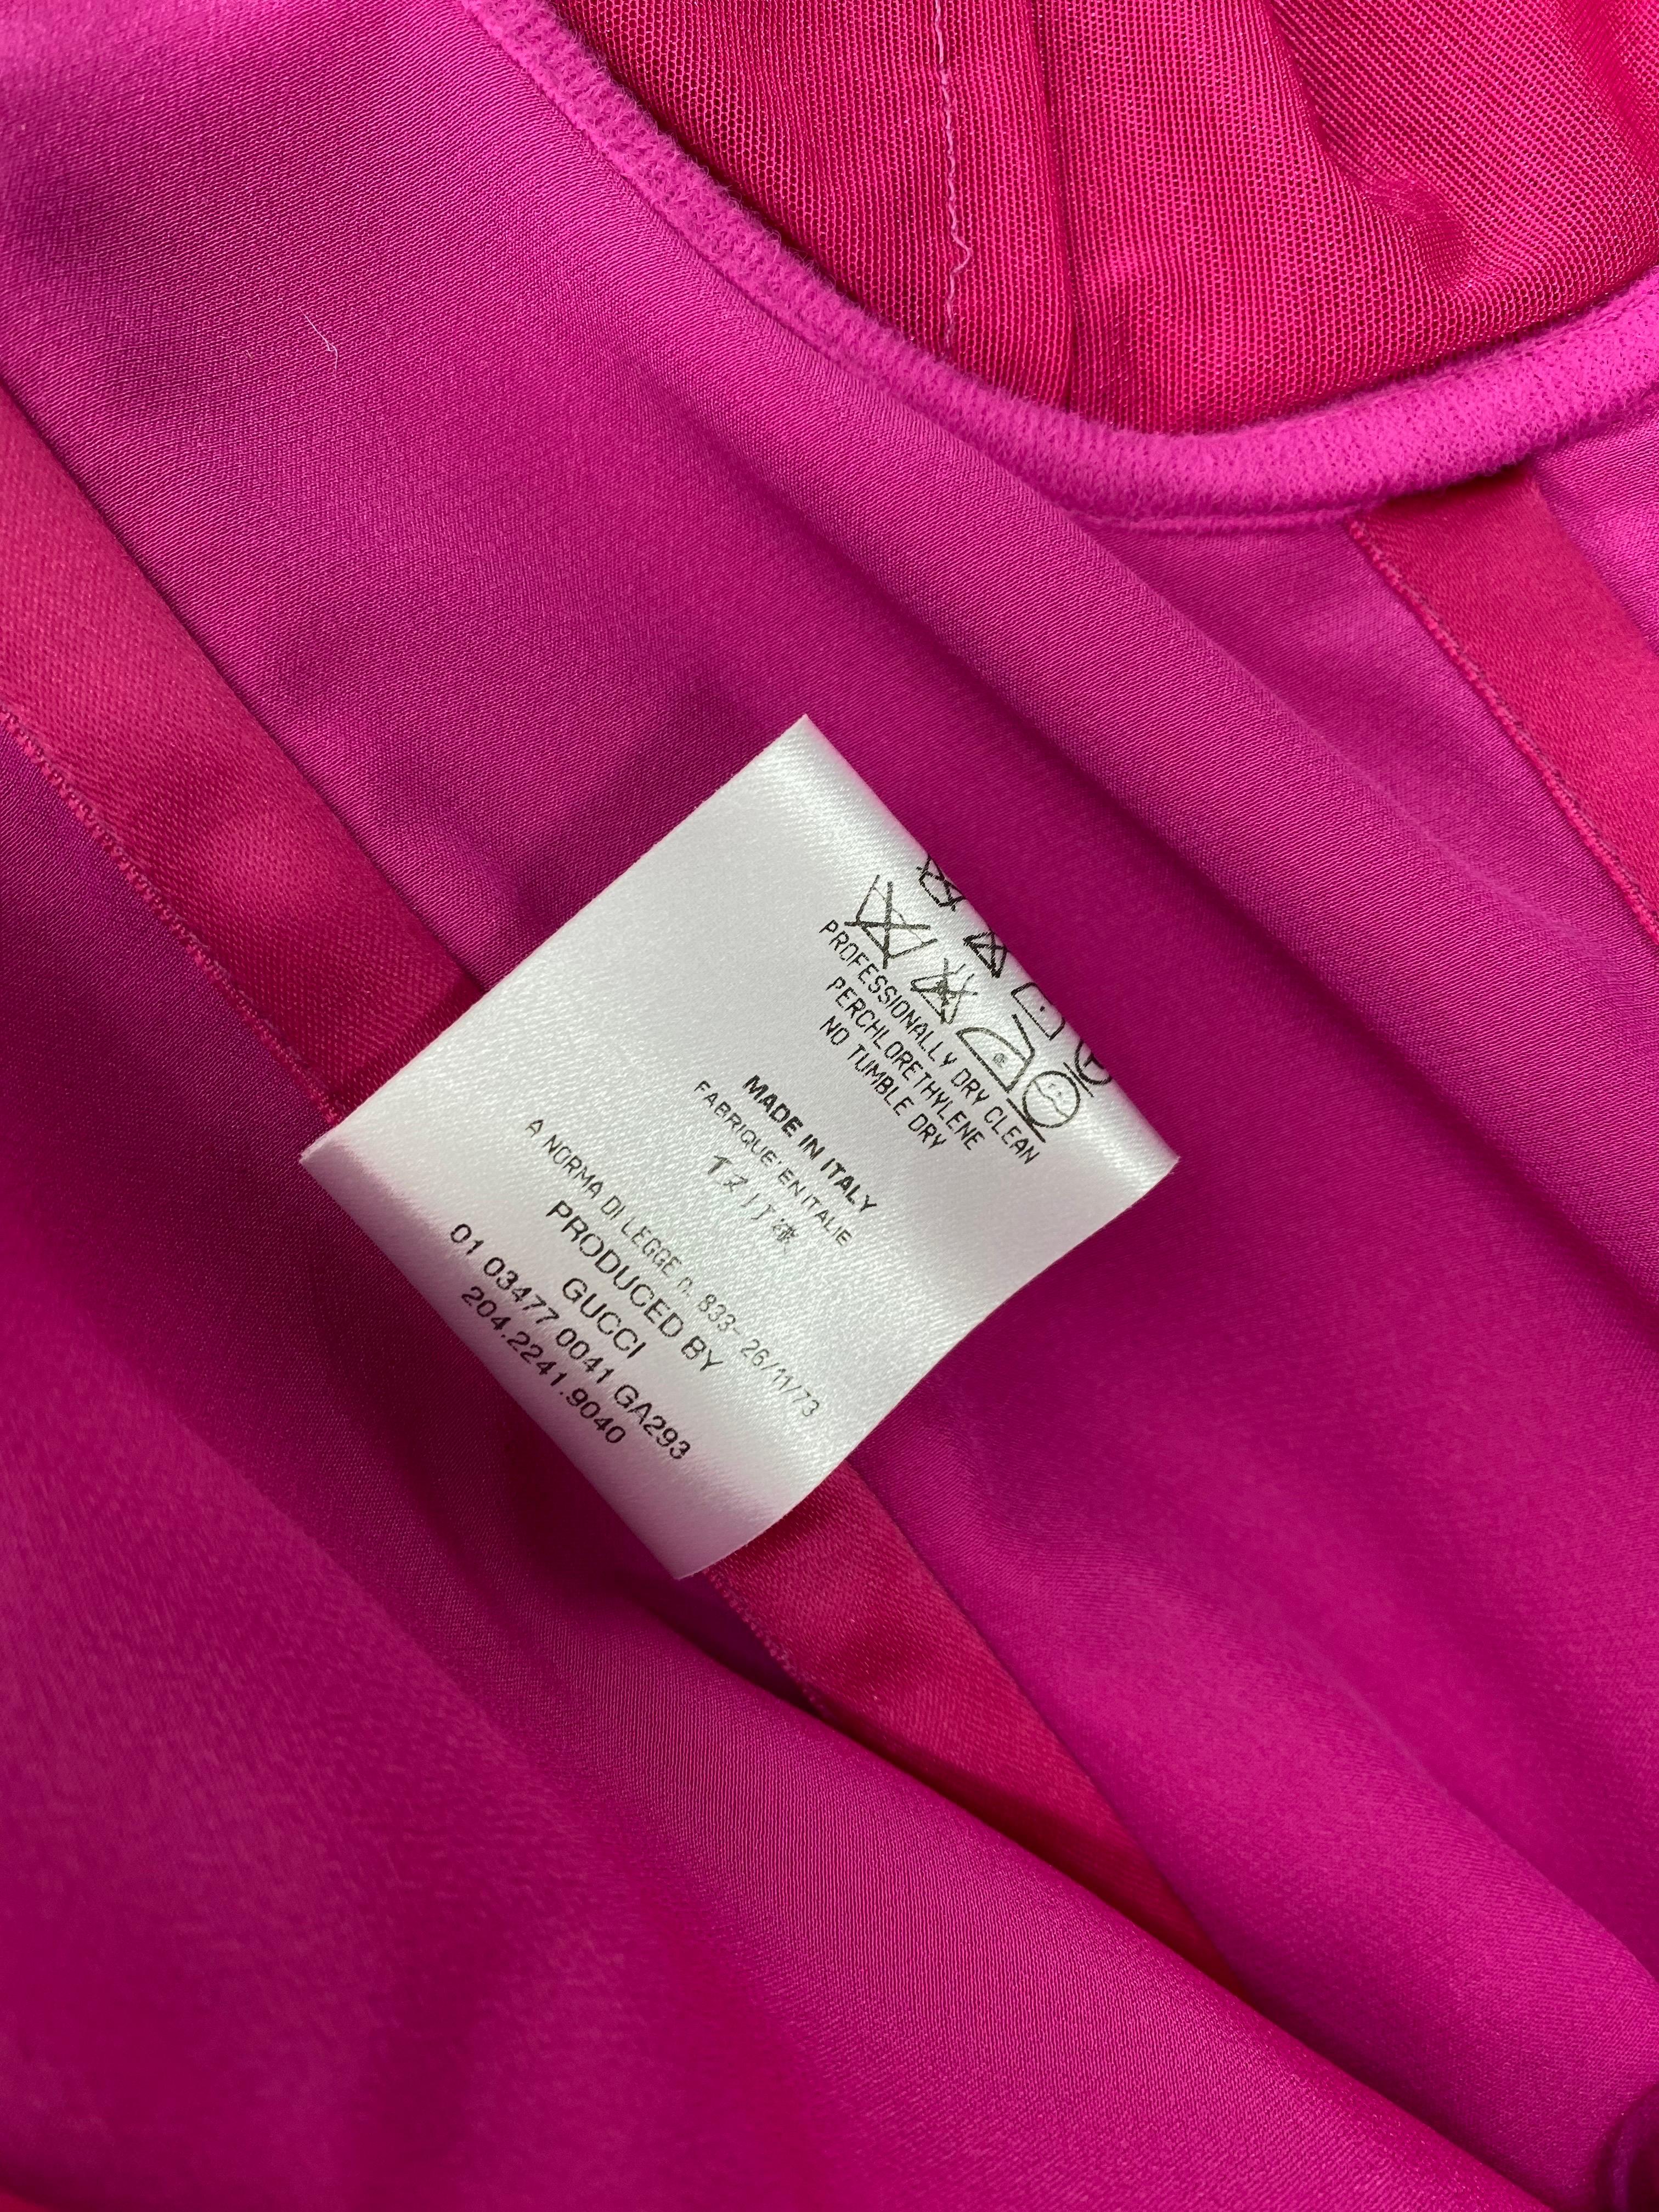 S/S 2001 Vintage Tom Ford for Gucci Hot Pink Strapless Dress For Sale 1